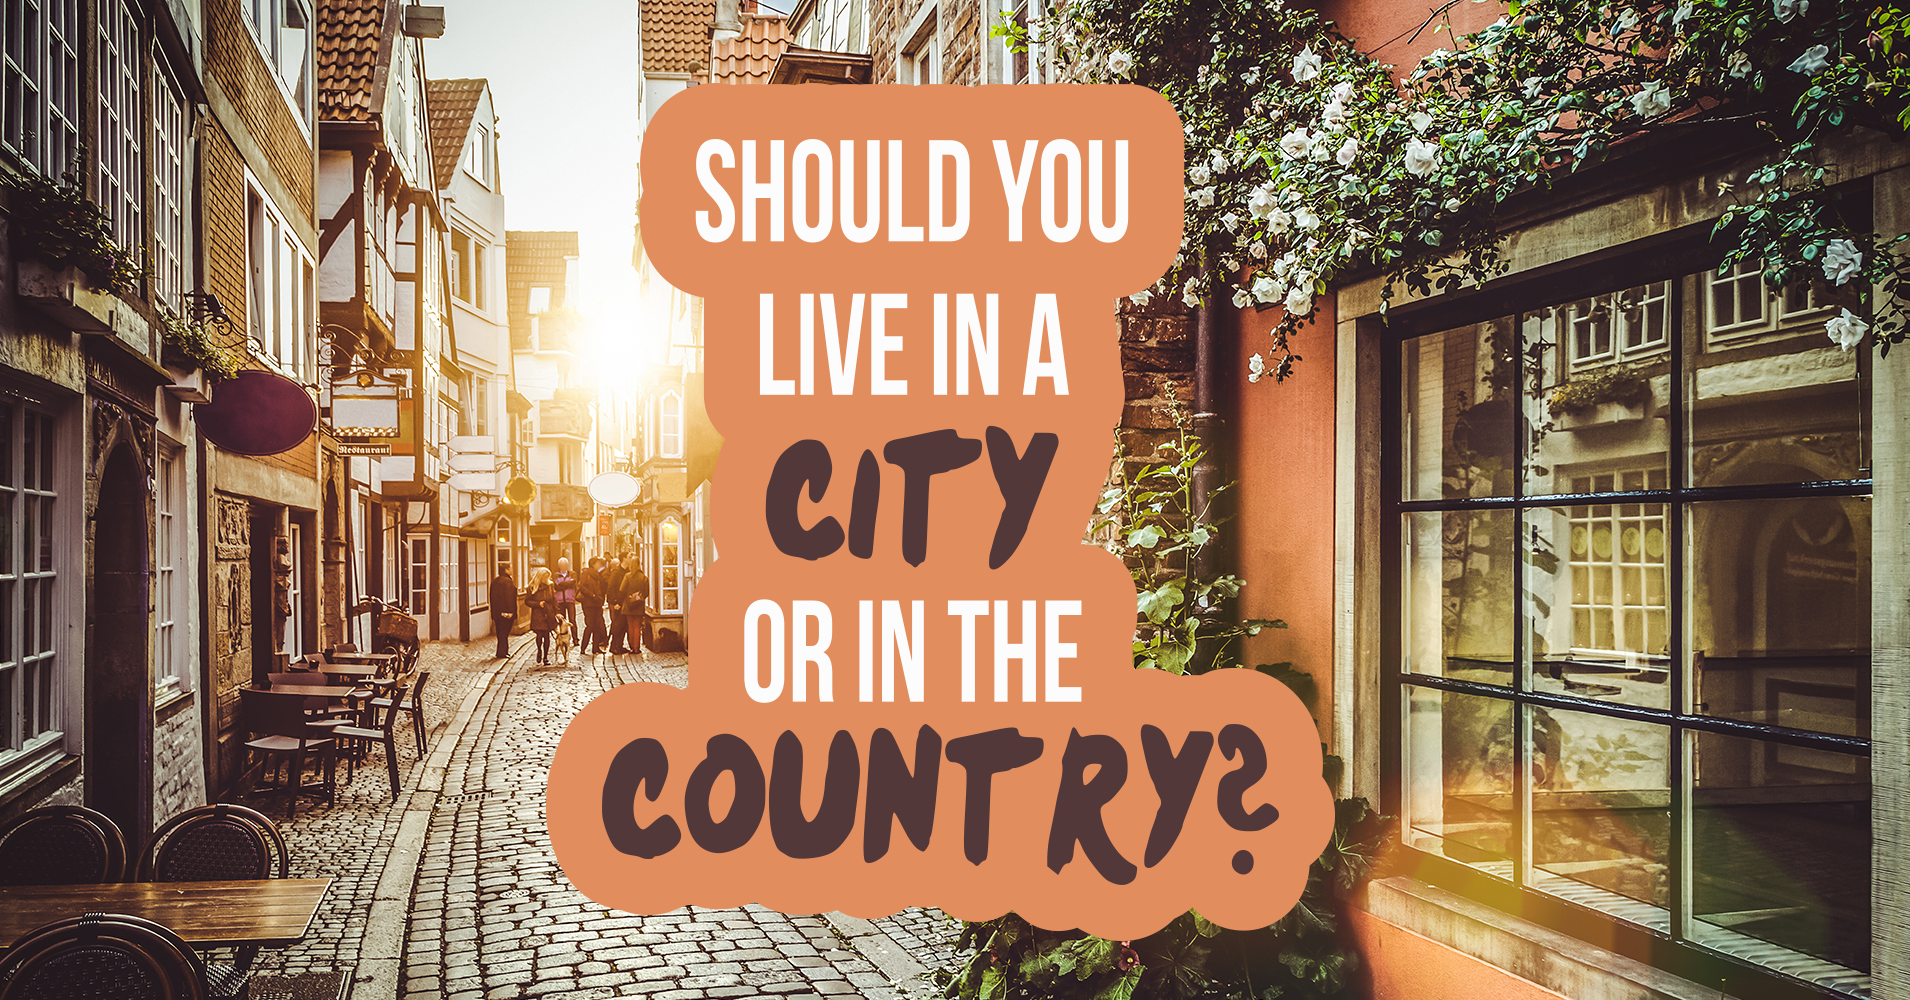 what country would you like to live in